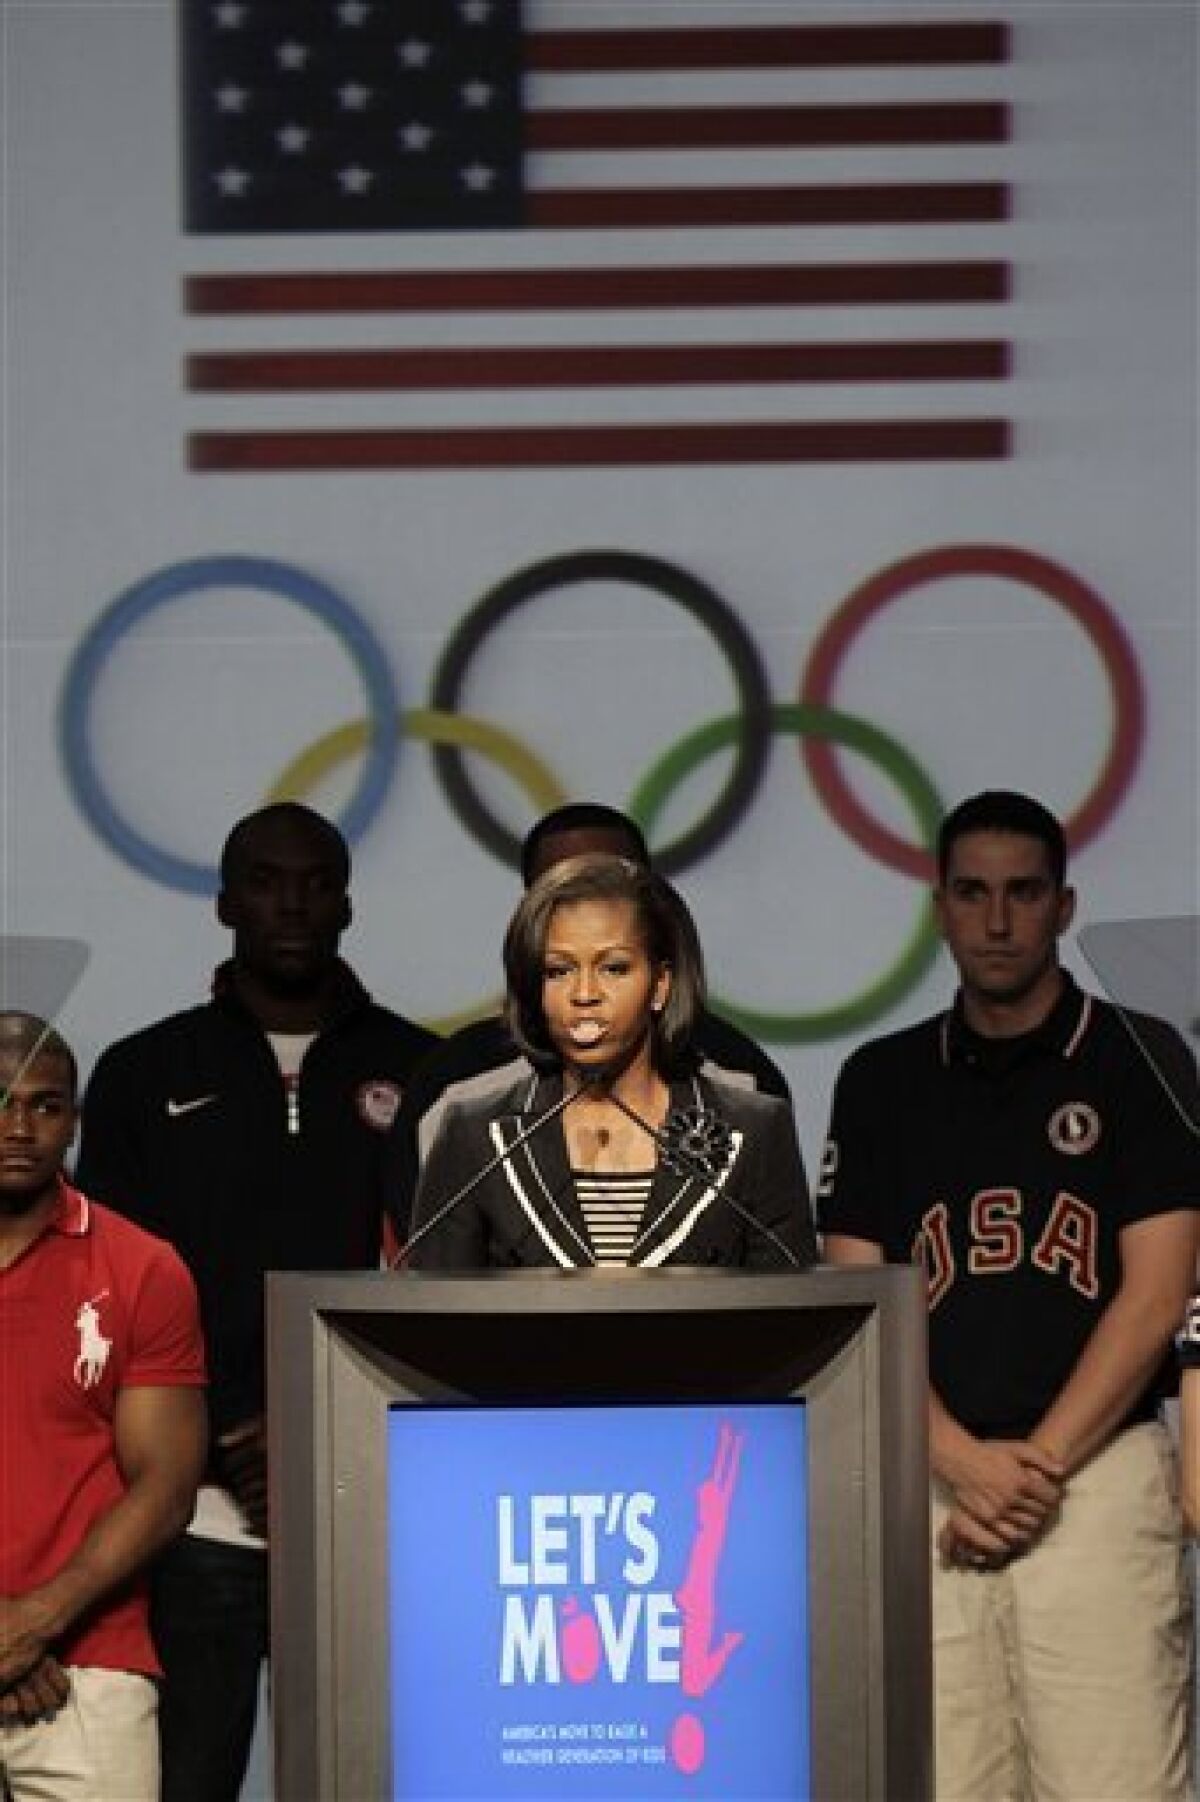 First lady Michelle Obama speaks during a news conference in Dallas, Monday, May 14, 2012, with athletes at the 2012 Team USA Media Summit. The first lady announced a new Let's Move initiative to combat childhood obesity. (AP Photo/LM Otero)